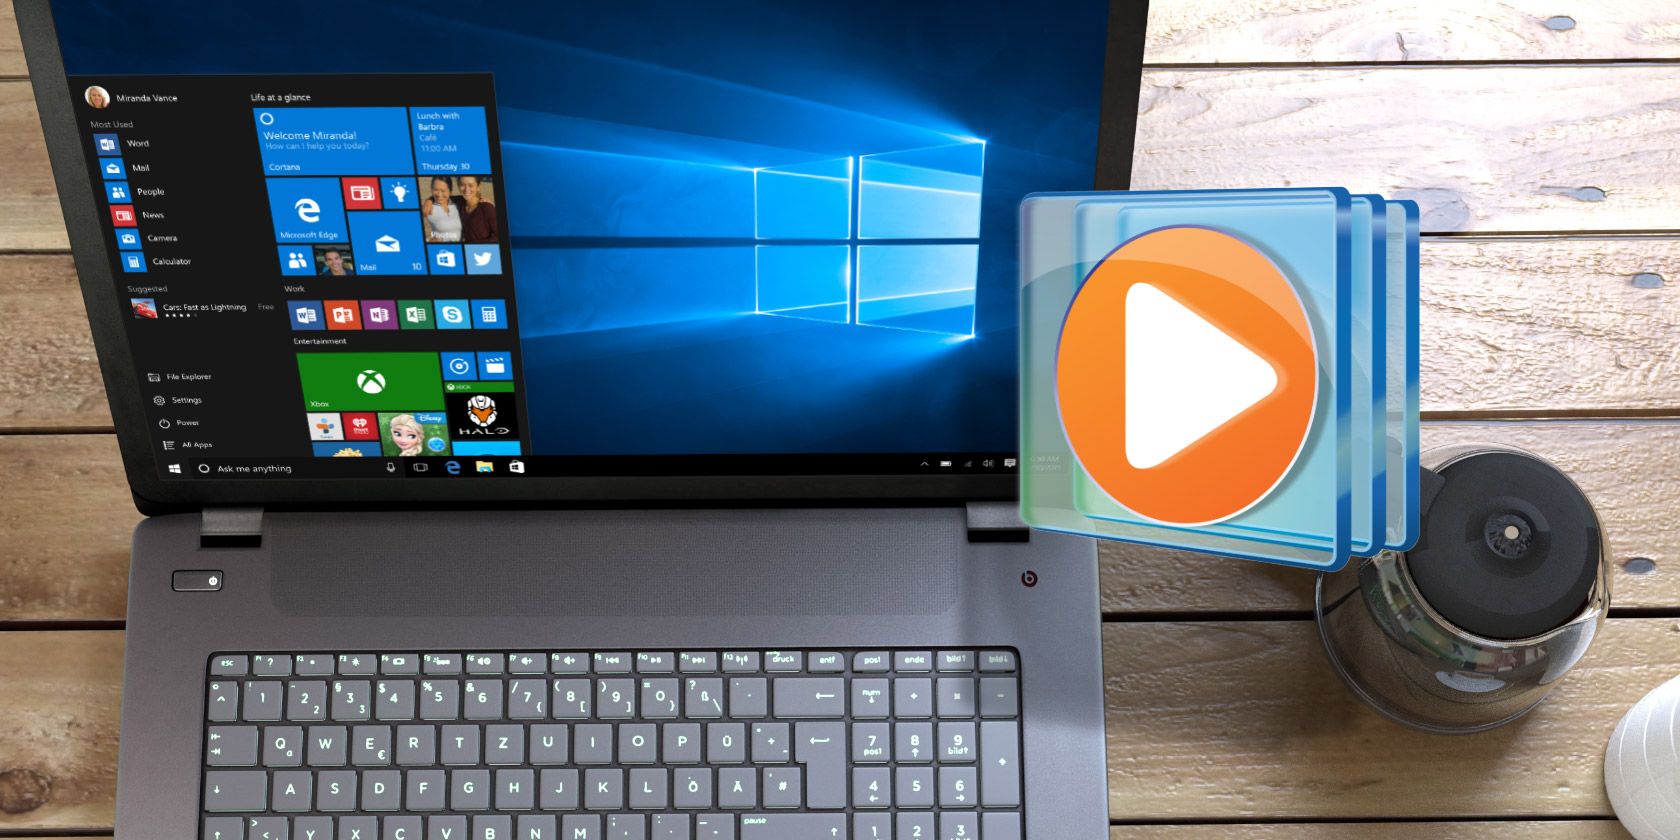 How to Download Windows Media Player 12 for Windows 10